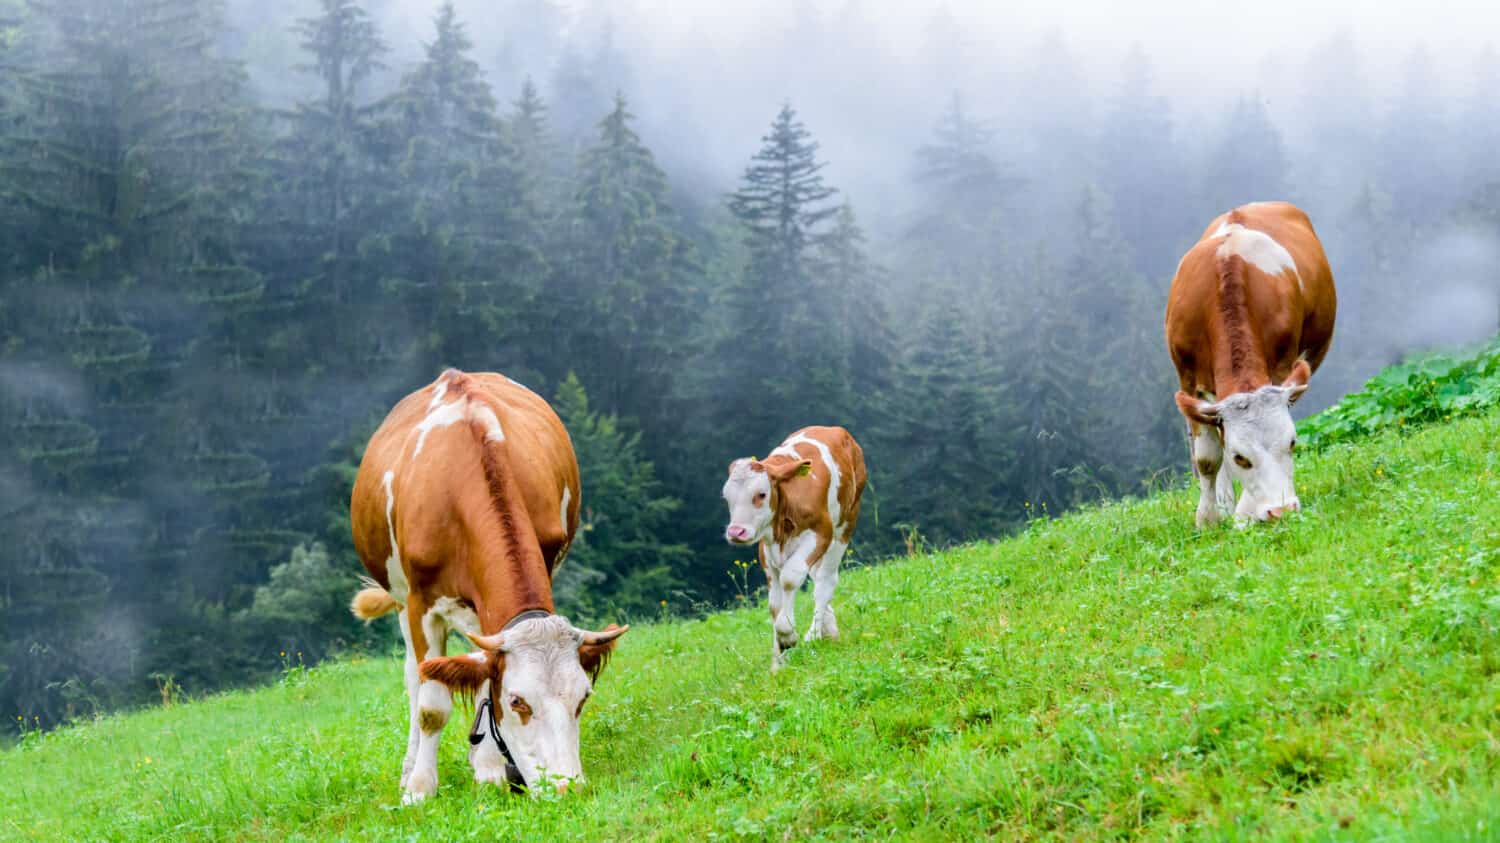 Small herd of cows eating fresh grass on an organic farm